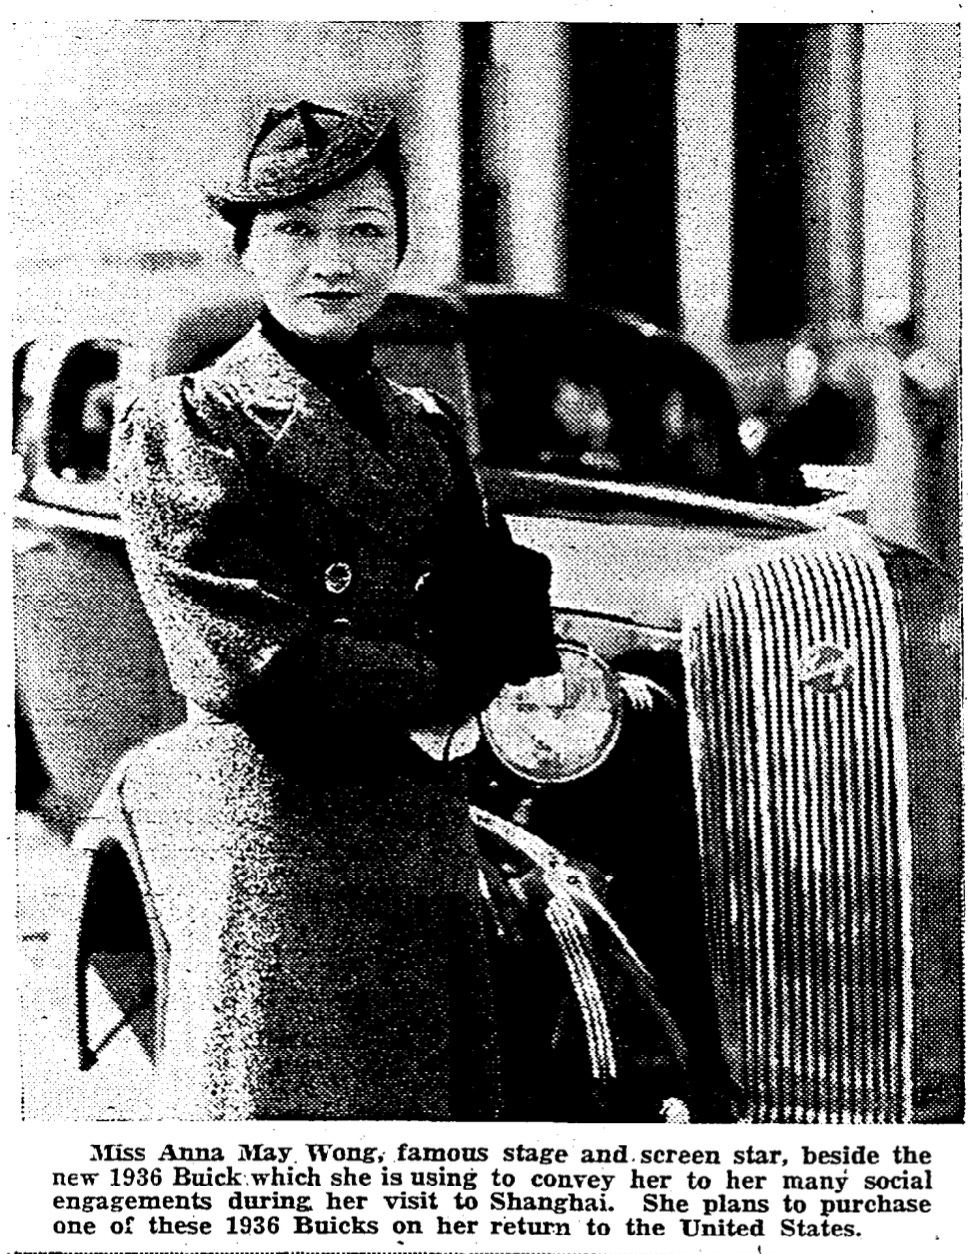 Anna May Wong, dressed in a coat and hat, stands in front of a 1936 Buick in Shanghai